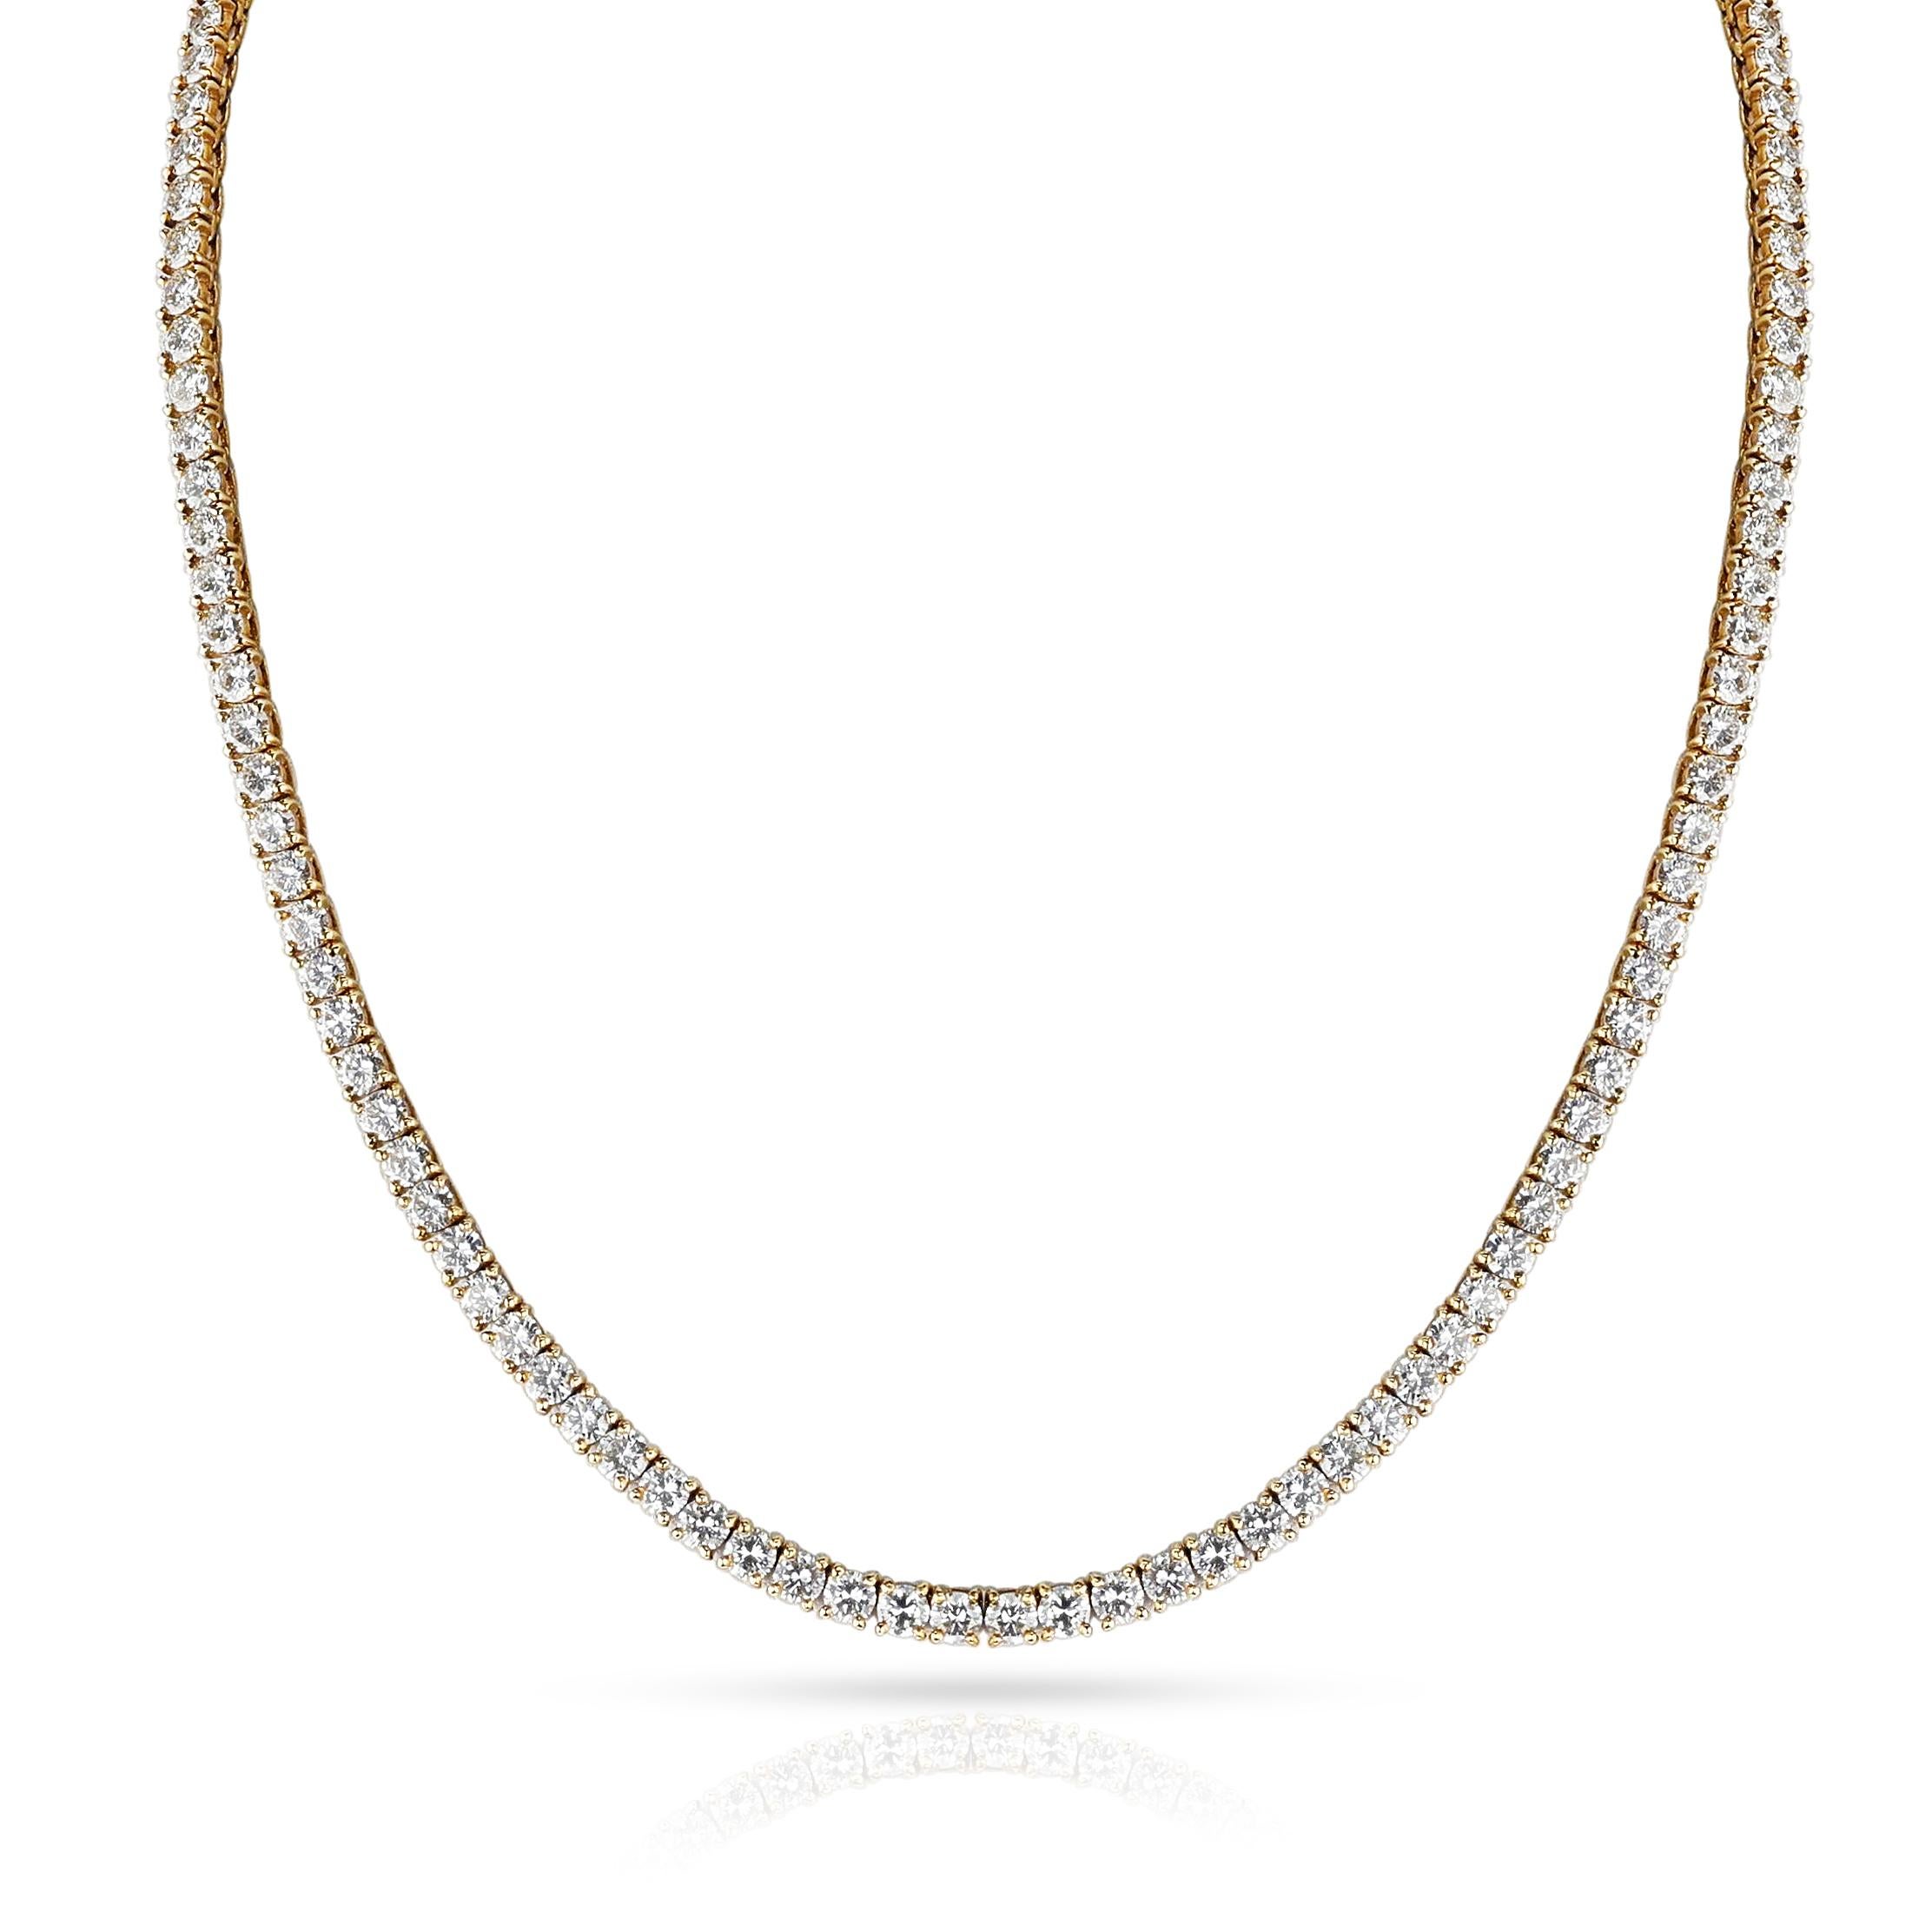 A Cartier Diamond Tennis Necklace made in 18k Yellow Gold with round diamonds weighing appx. 17.50 carats. The Length is 15 3/4 inches. The color of the diamonds is appx. G-H, clarity is appx. VS-SI. The total weight is 26.59 grams.

SKU 1438-